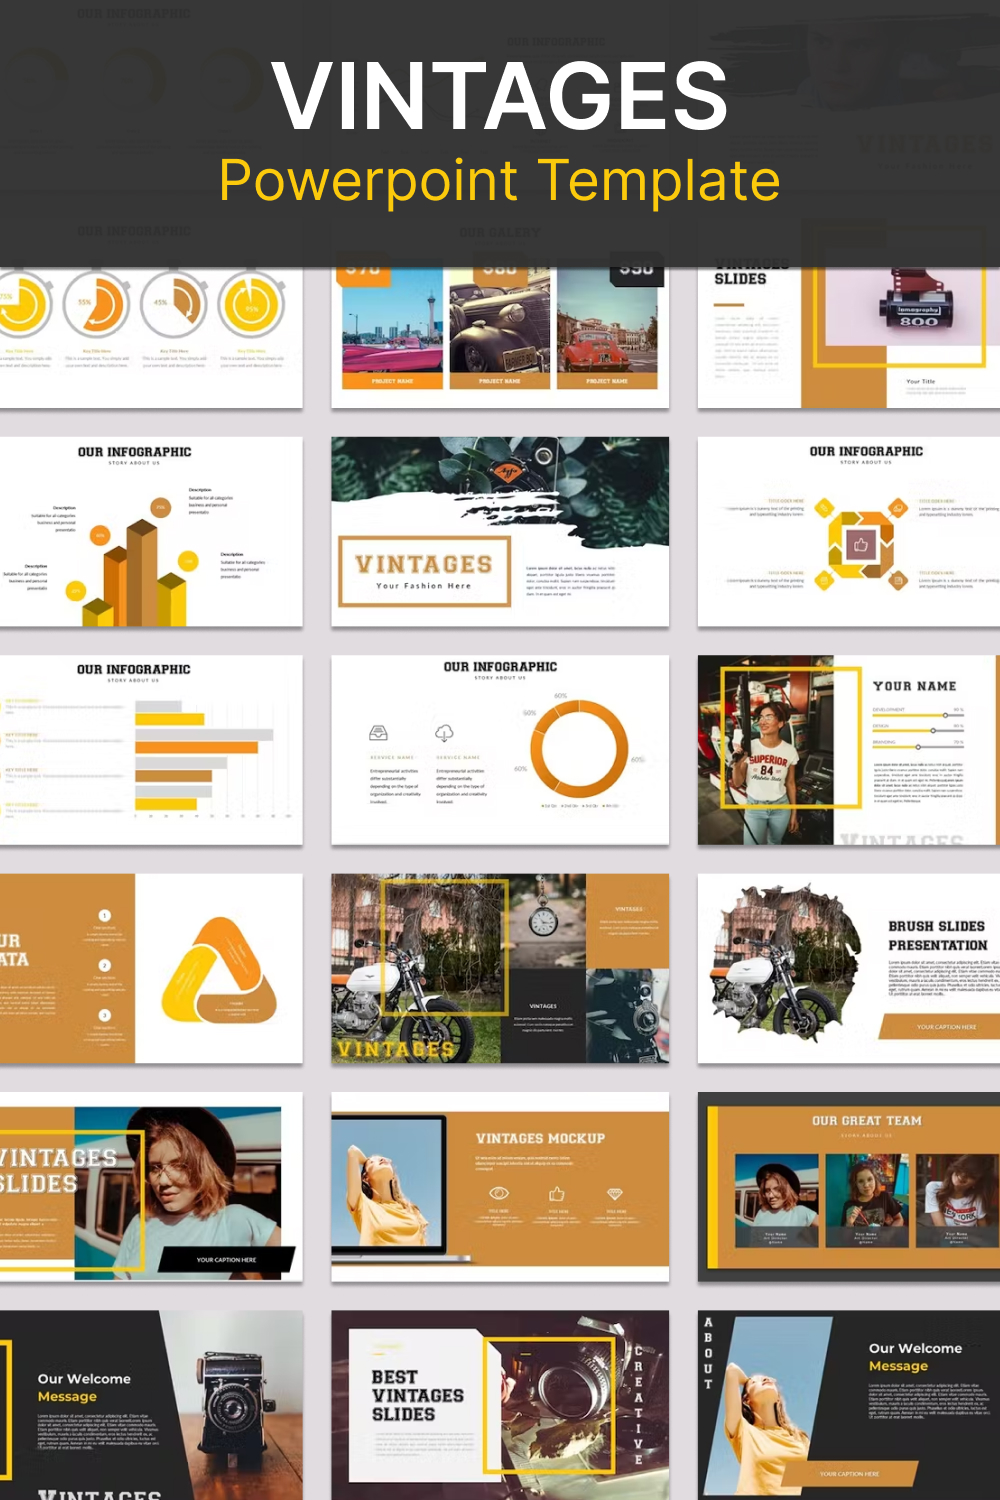 Vintages powerpoint template of pinterest.